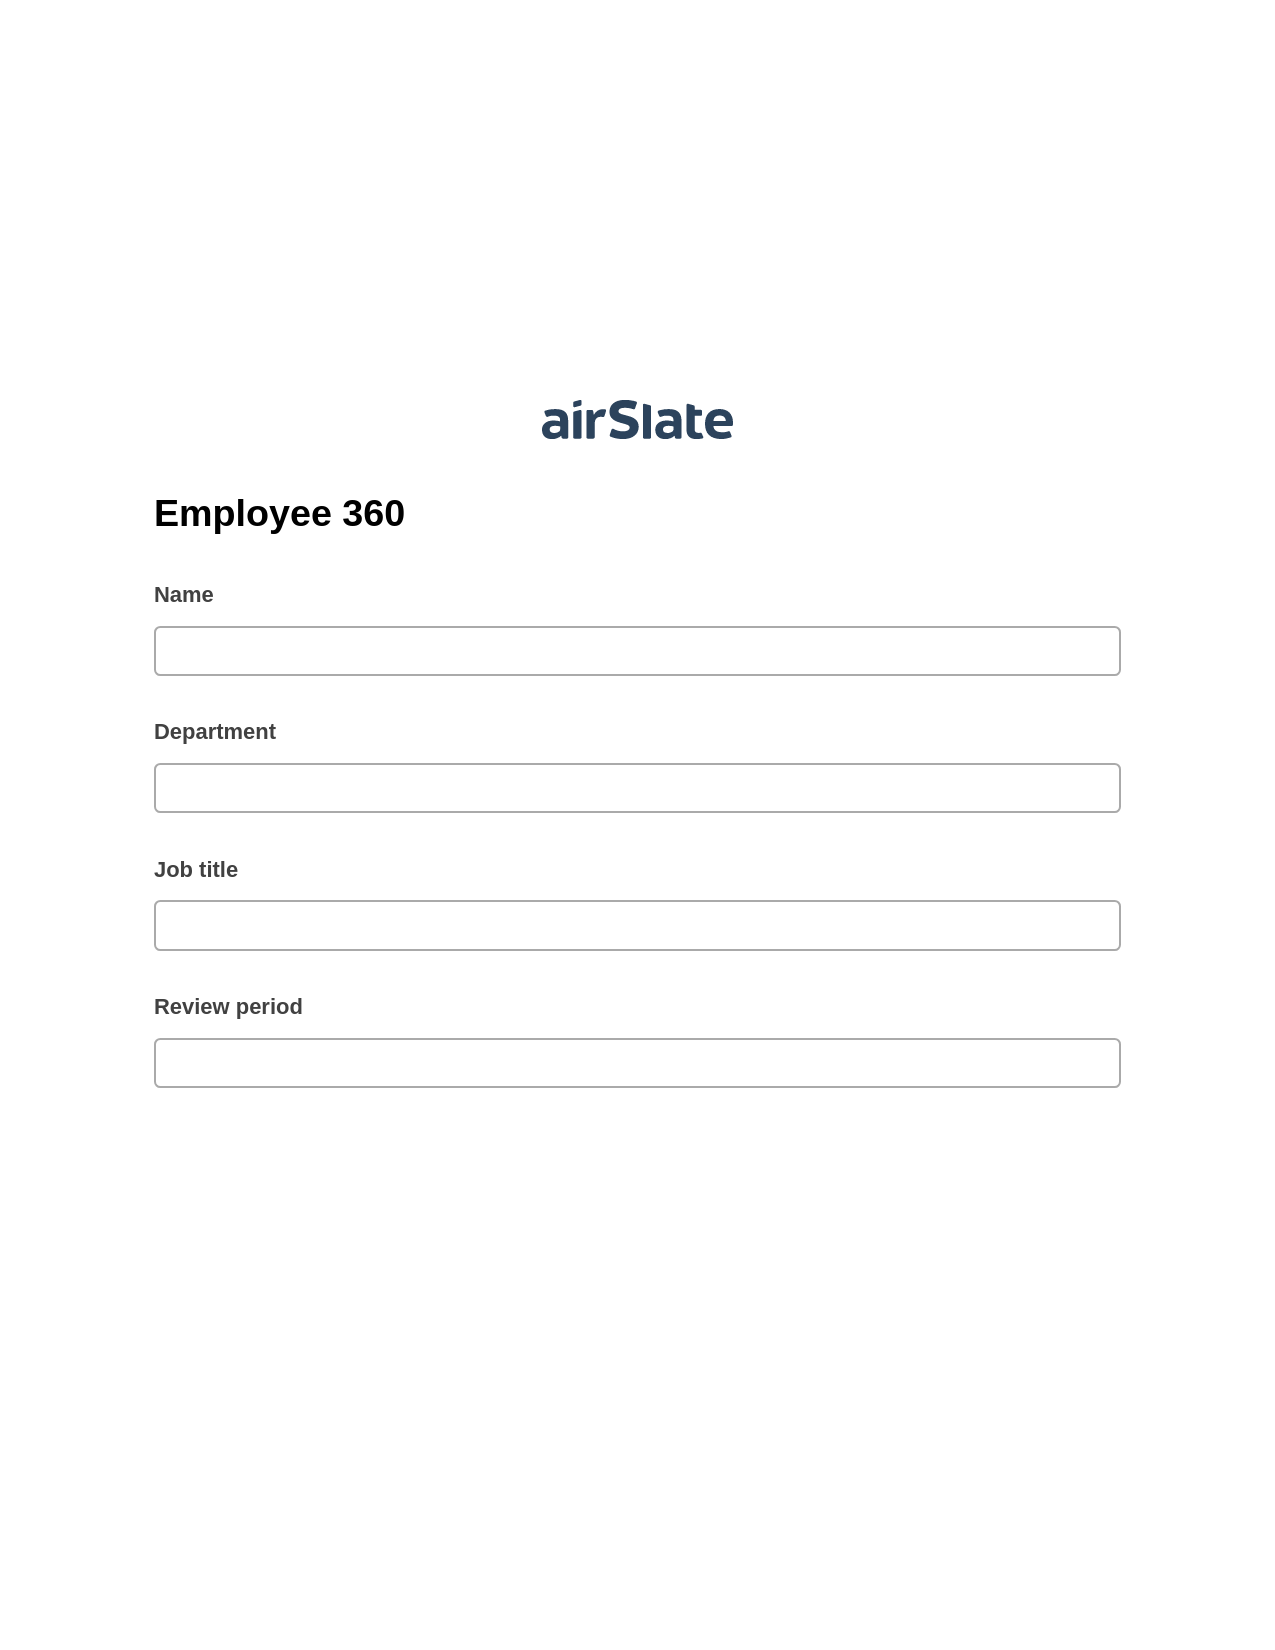 Multirole Employee 360 Pre-fill from Salesforce Records with SOQL Bot, Create slate addon, Export to NetSuite Bot